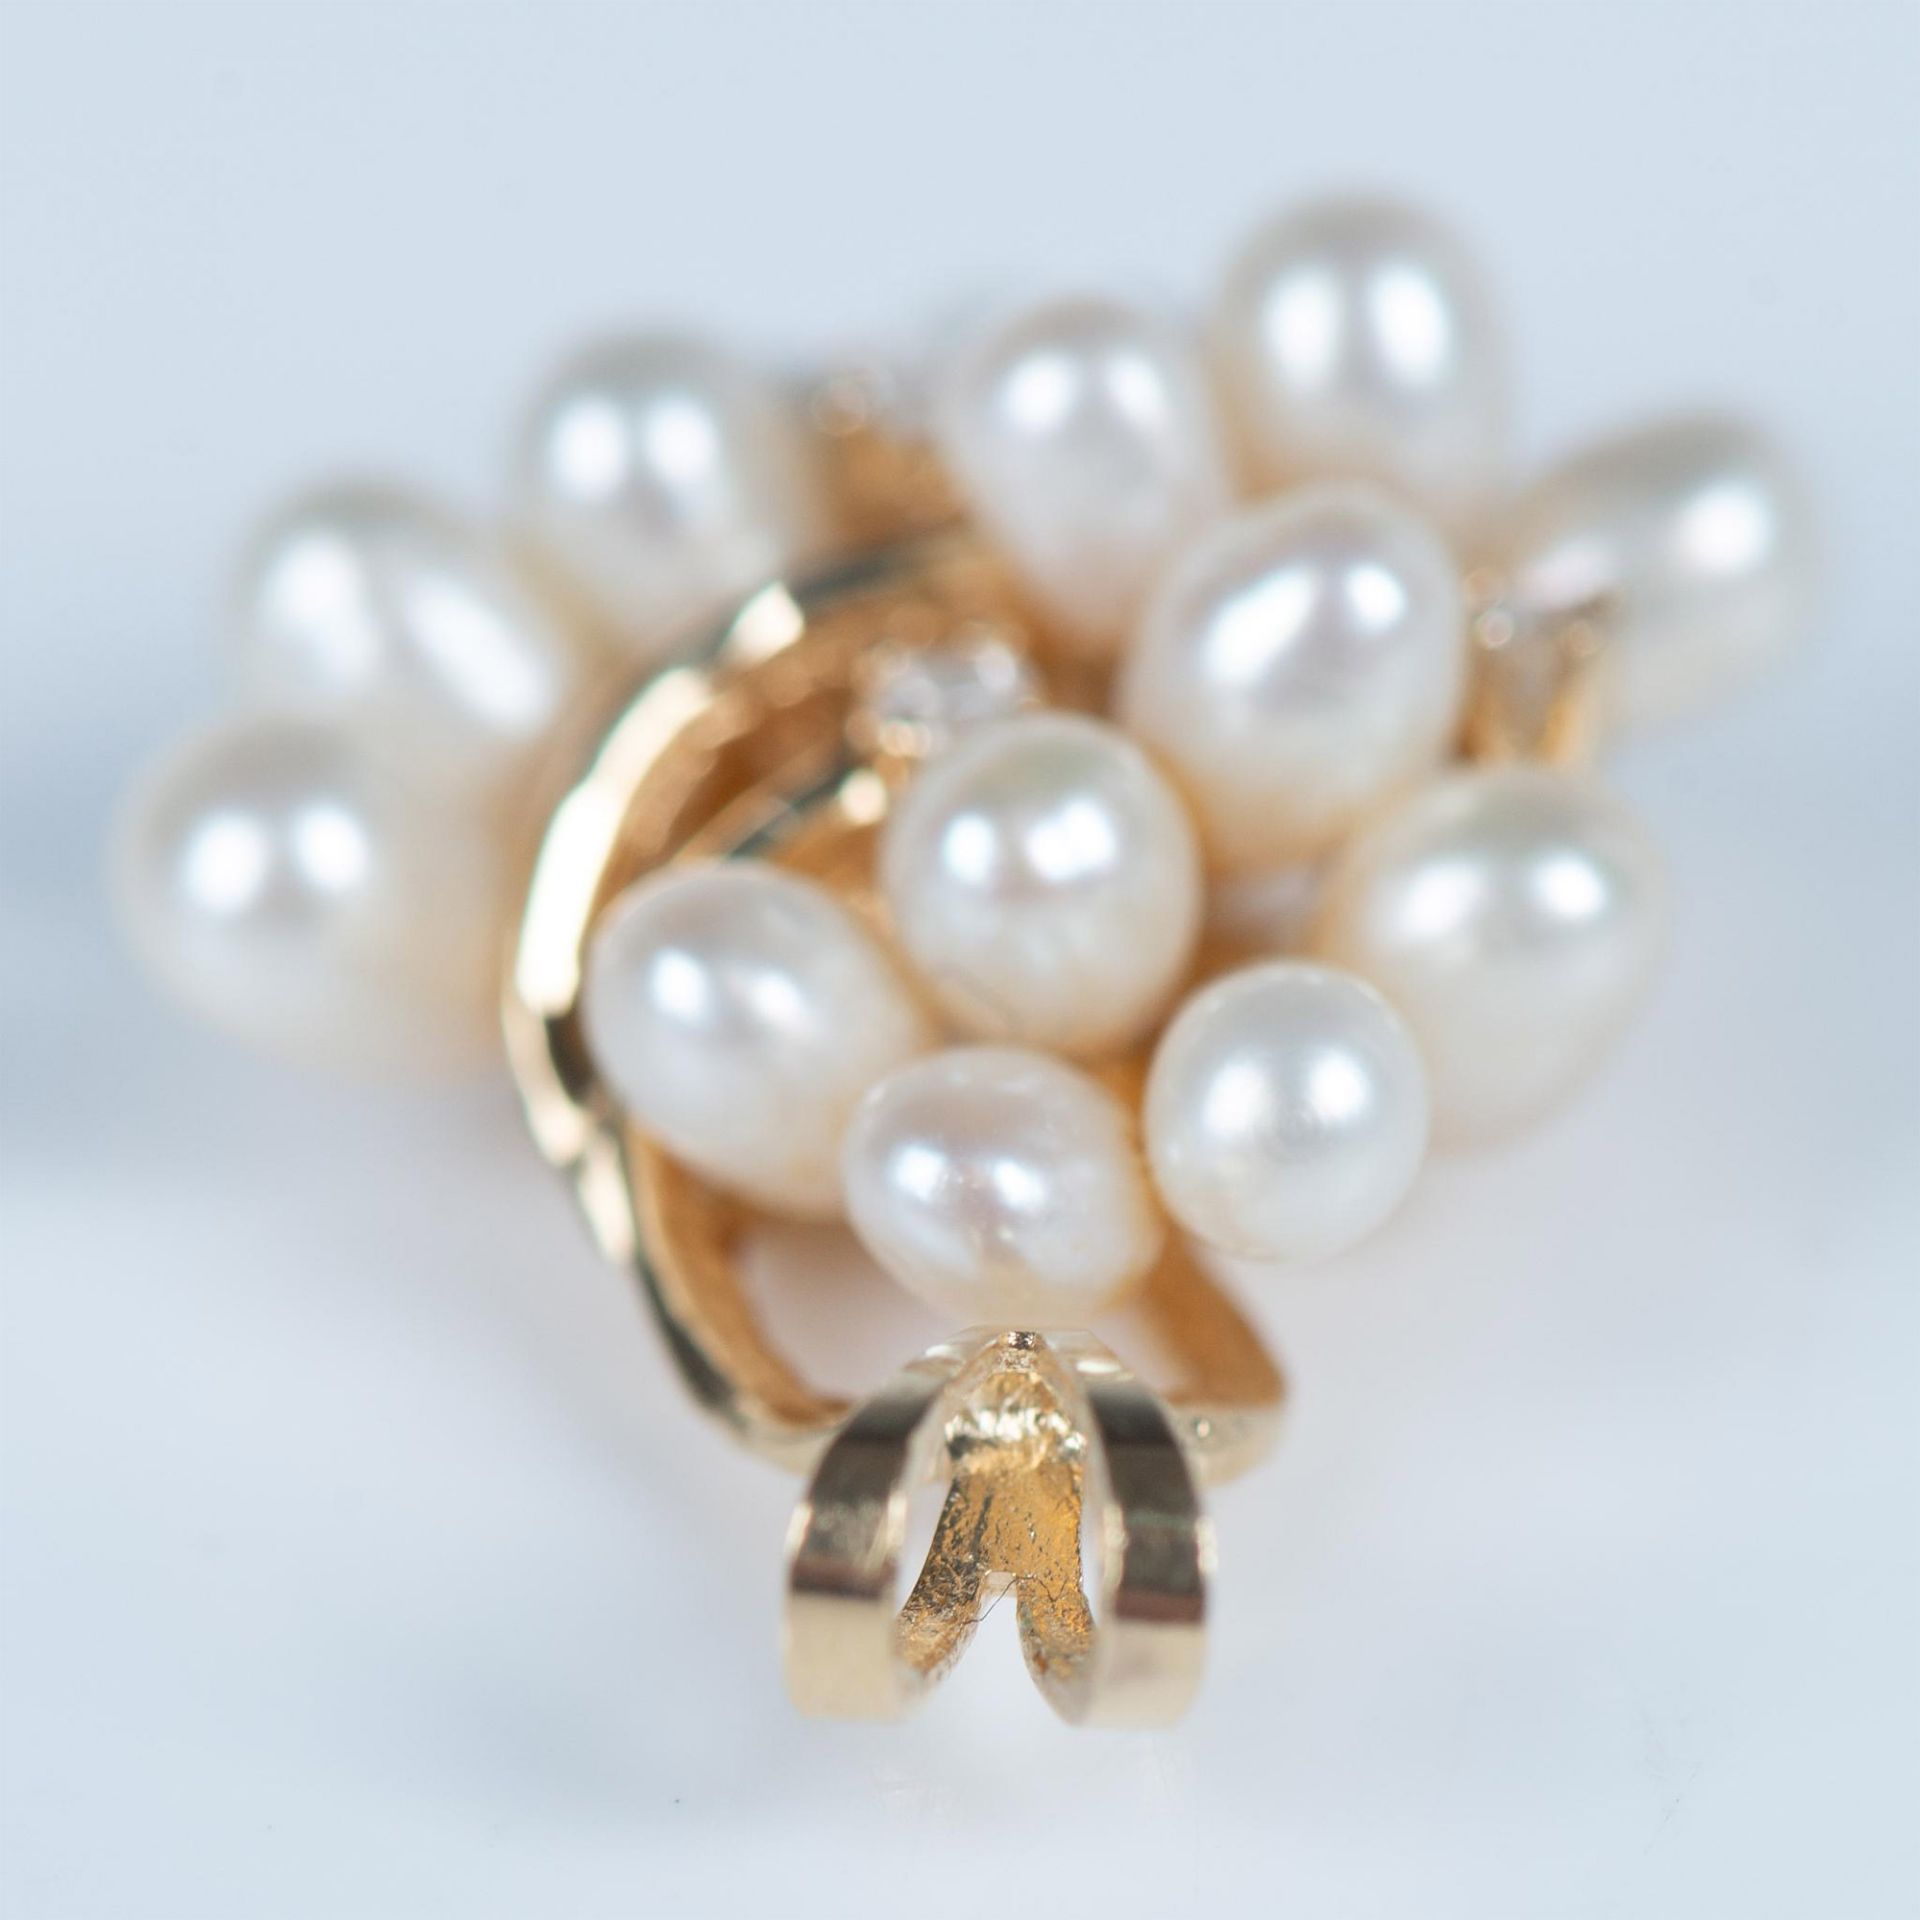 Fancy Vintage 14K Gold, Diamond and Pearl Cluster Pendant - Image 4 of 4